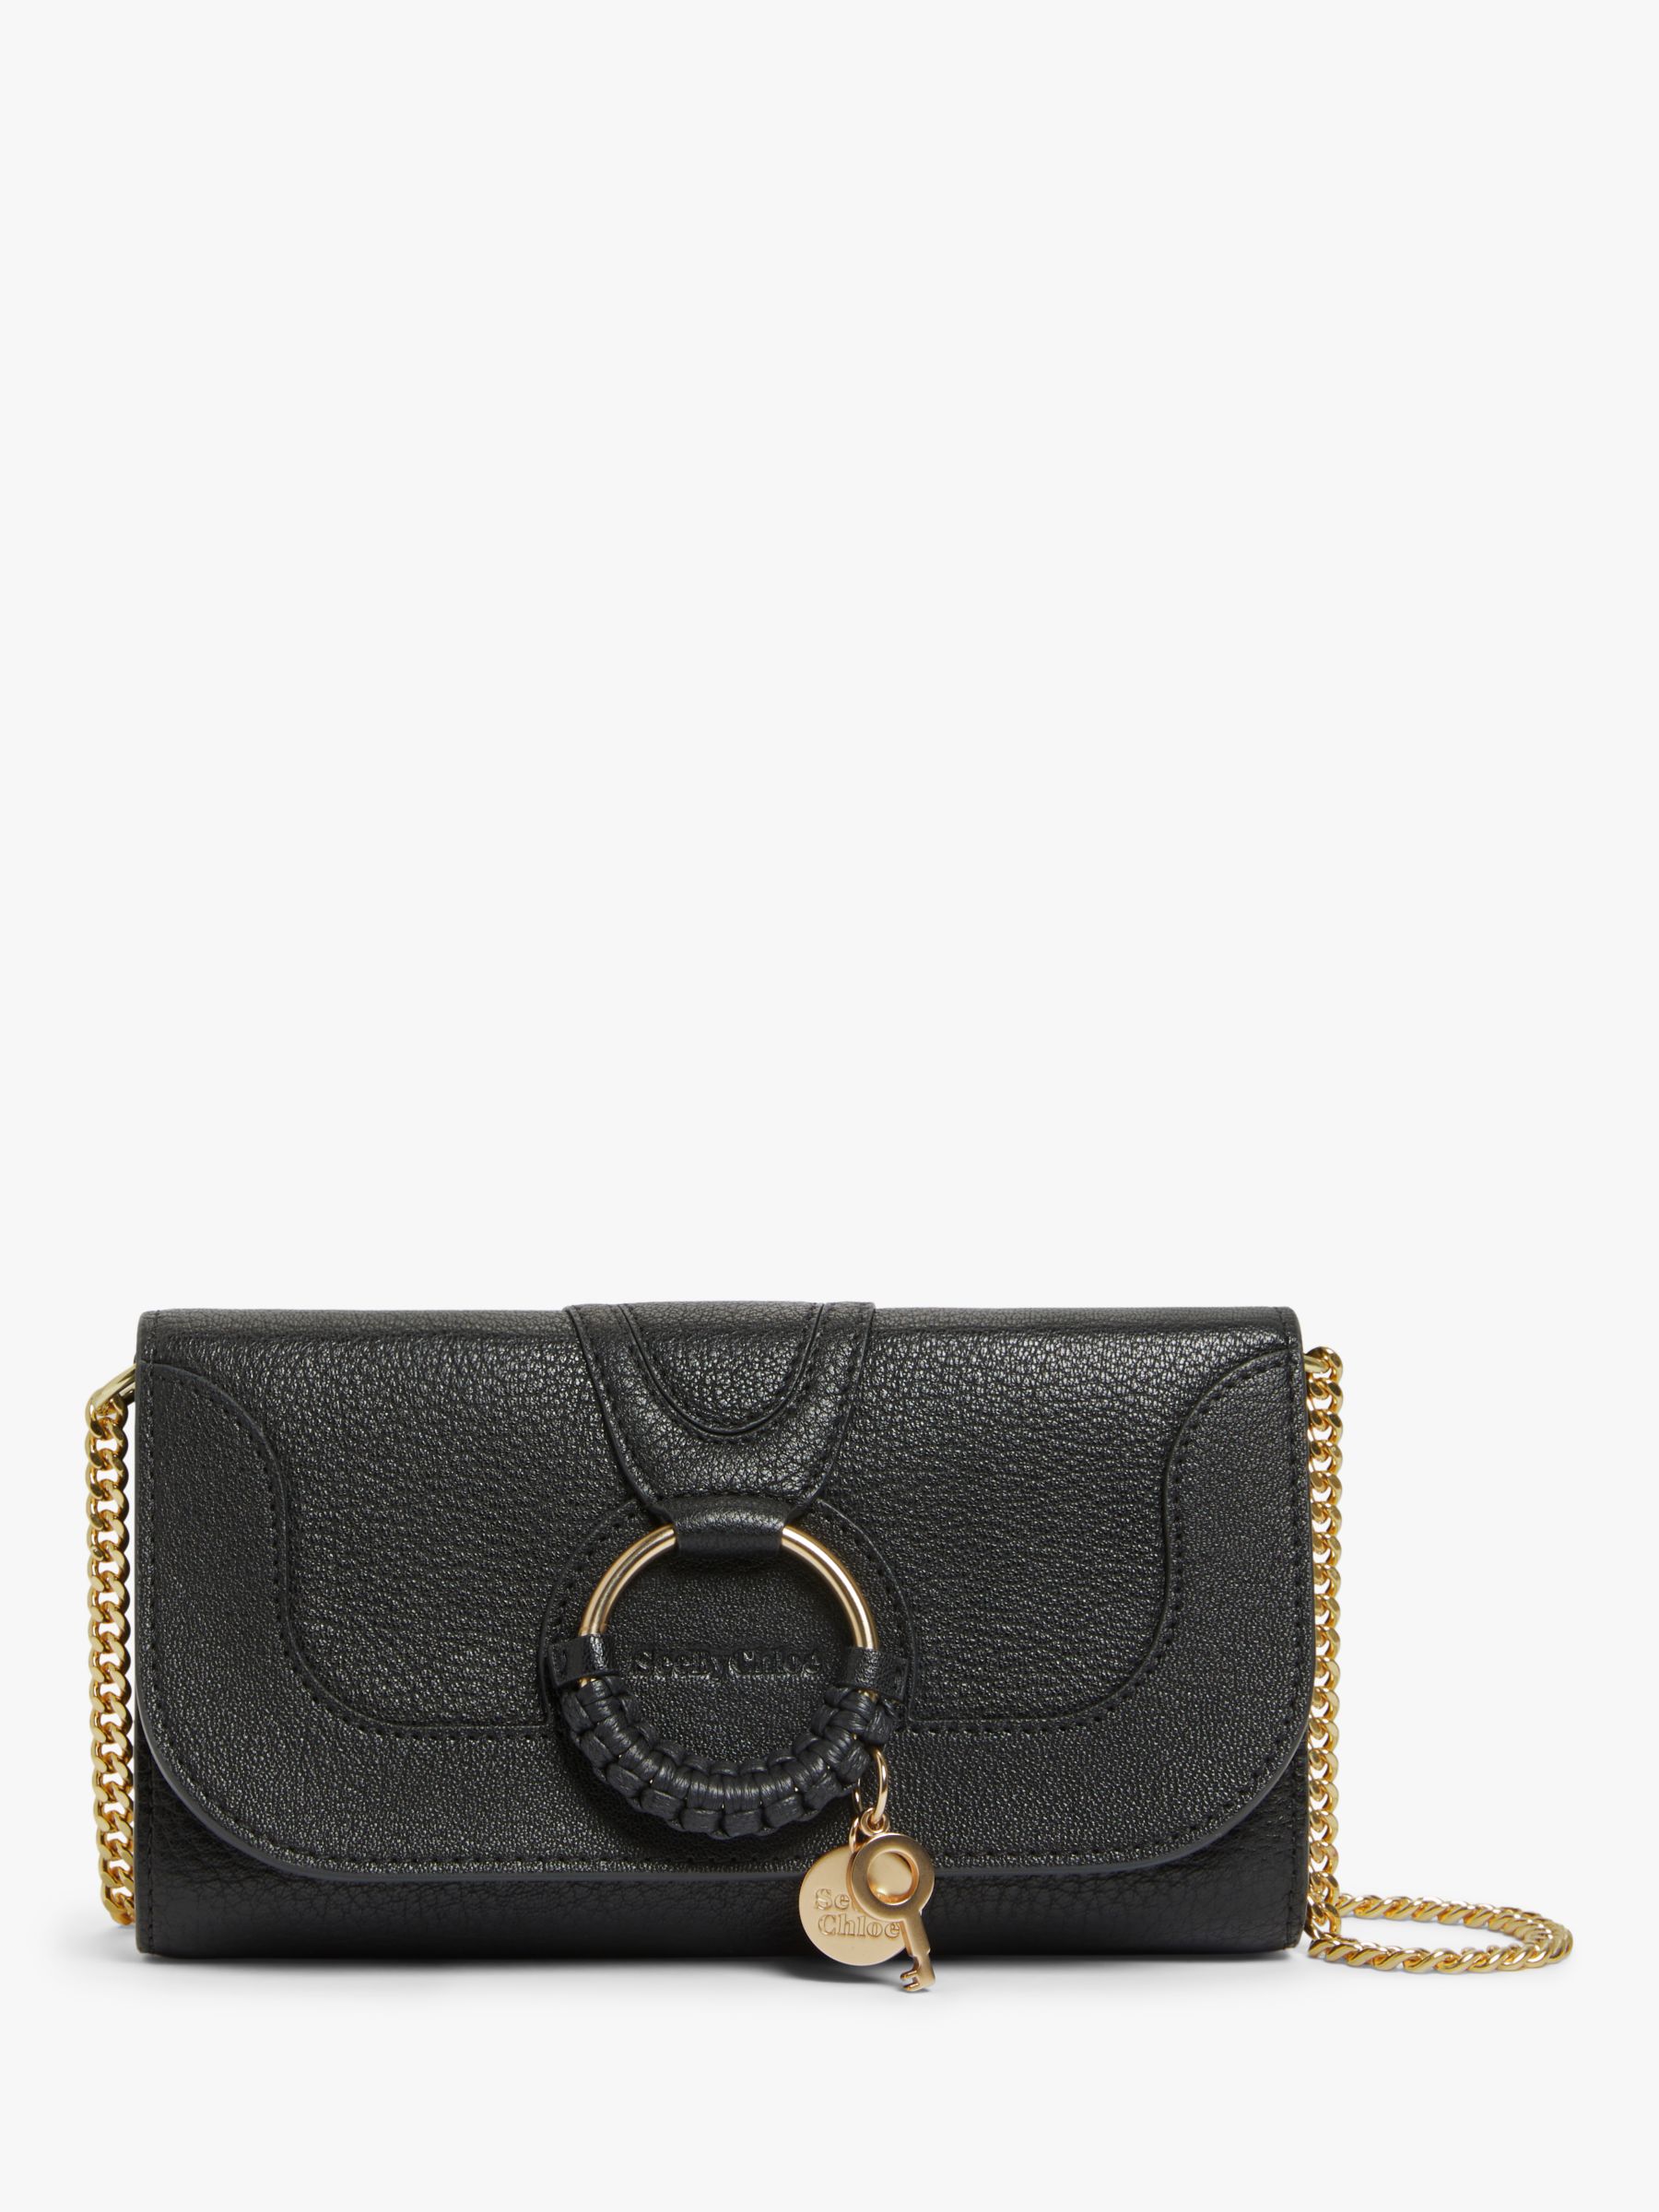 See By Chloé Hana Large Leather Chain Purse, Black at John Lewis & Partners